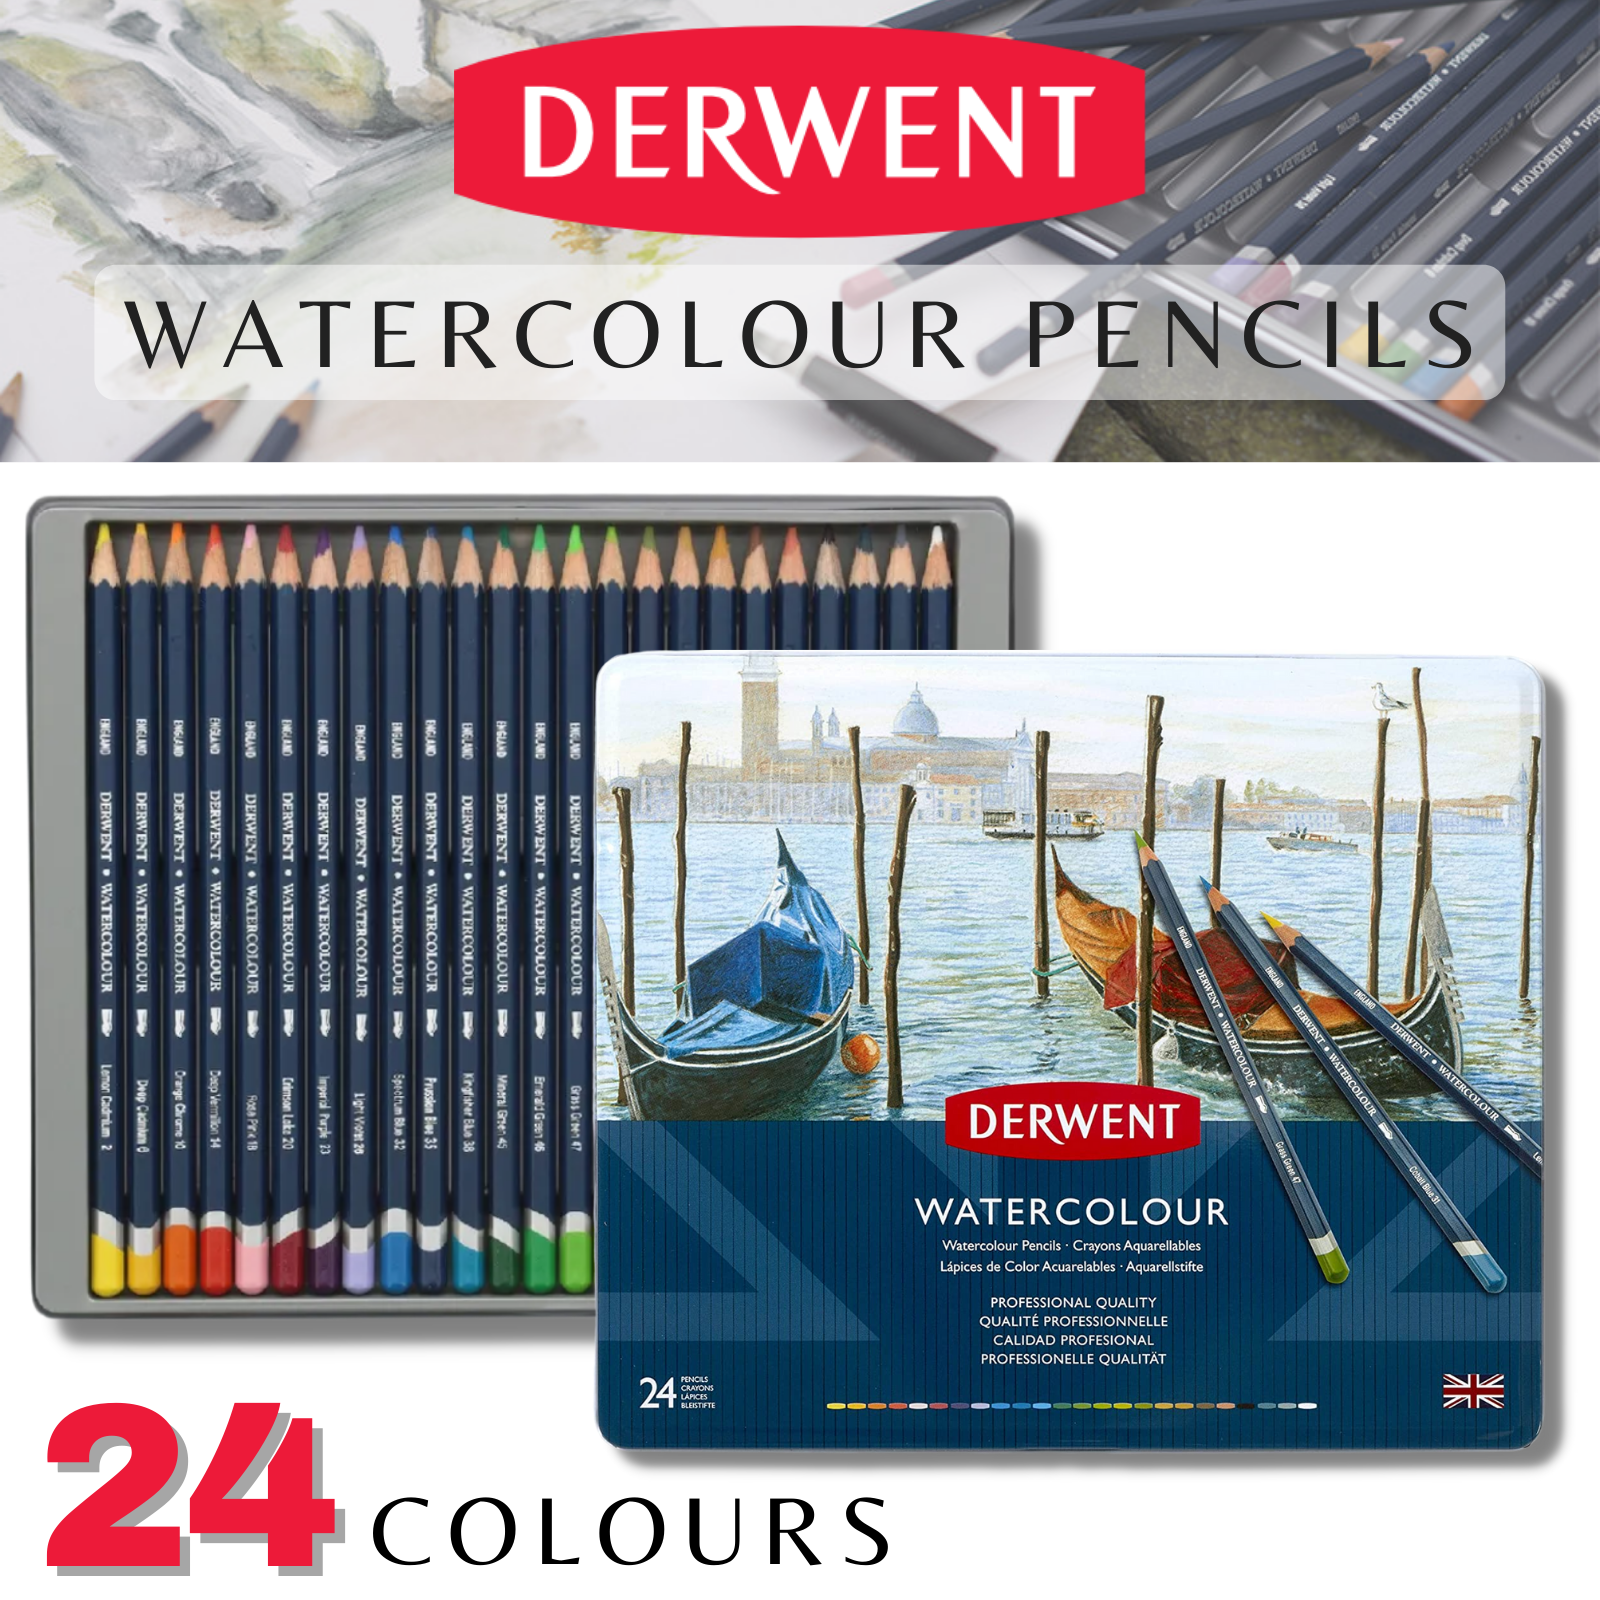 Derwent 24 Watercolour Pencils, Colouring, Blending, Layering, Drawing